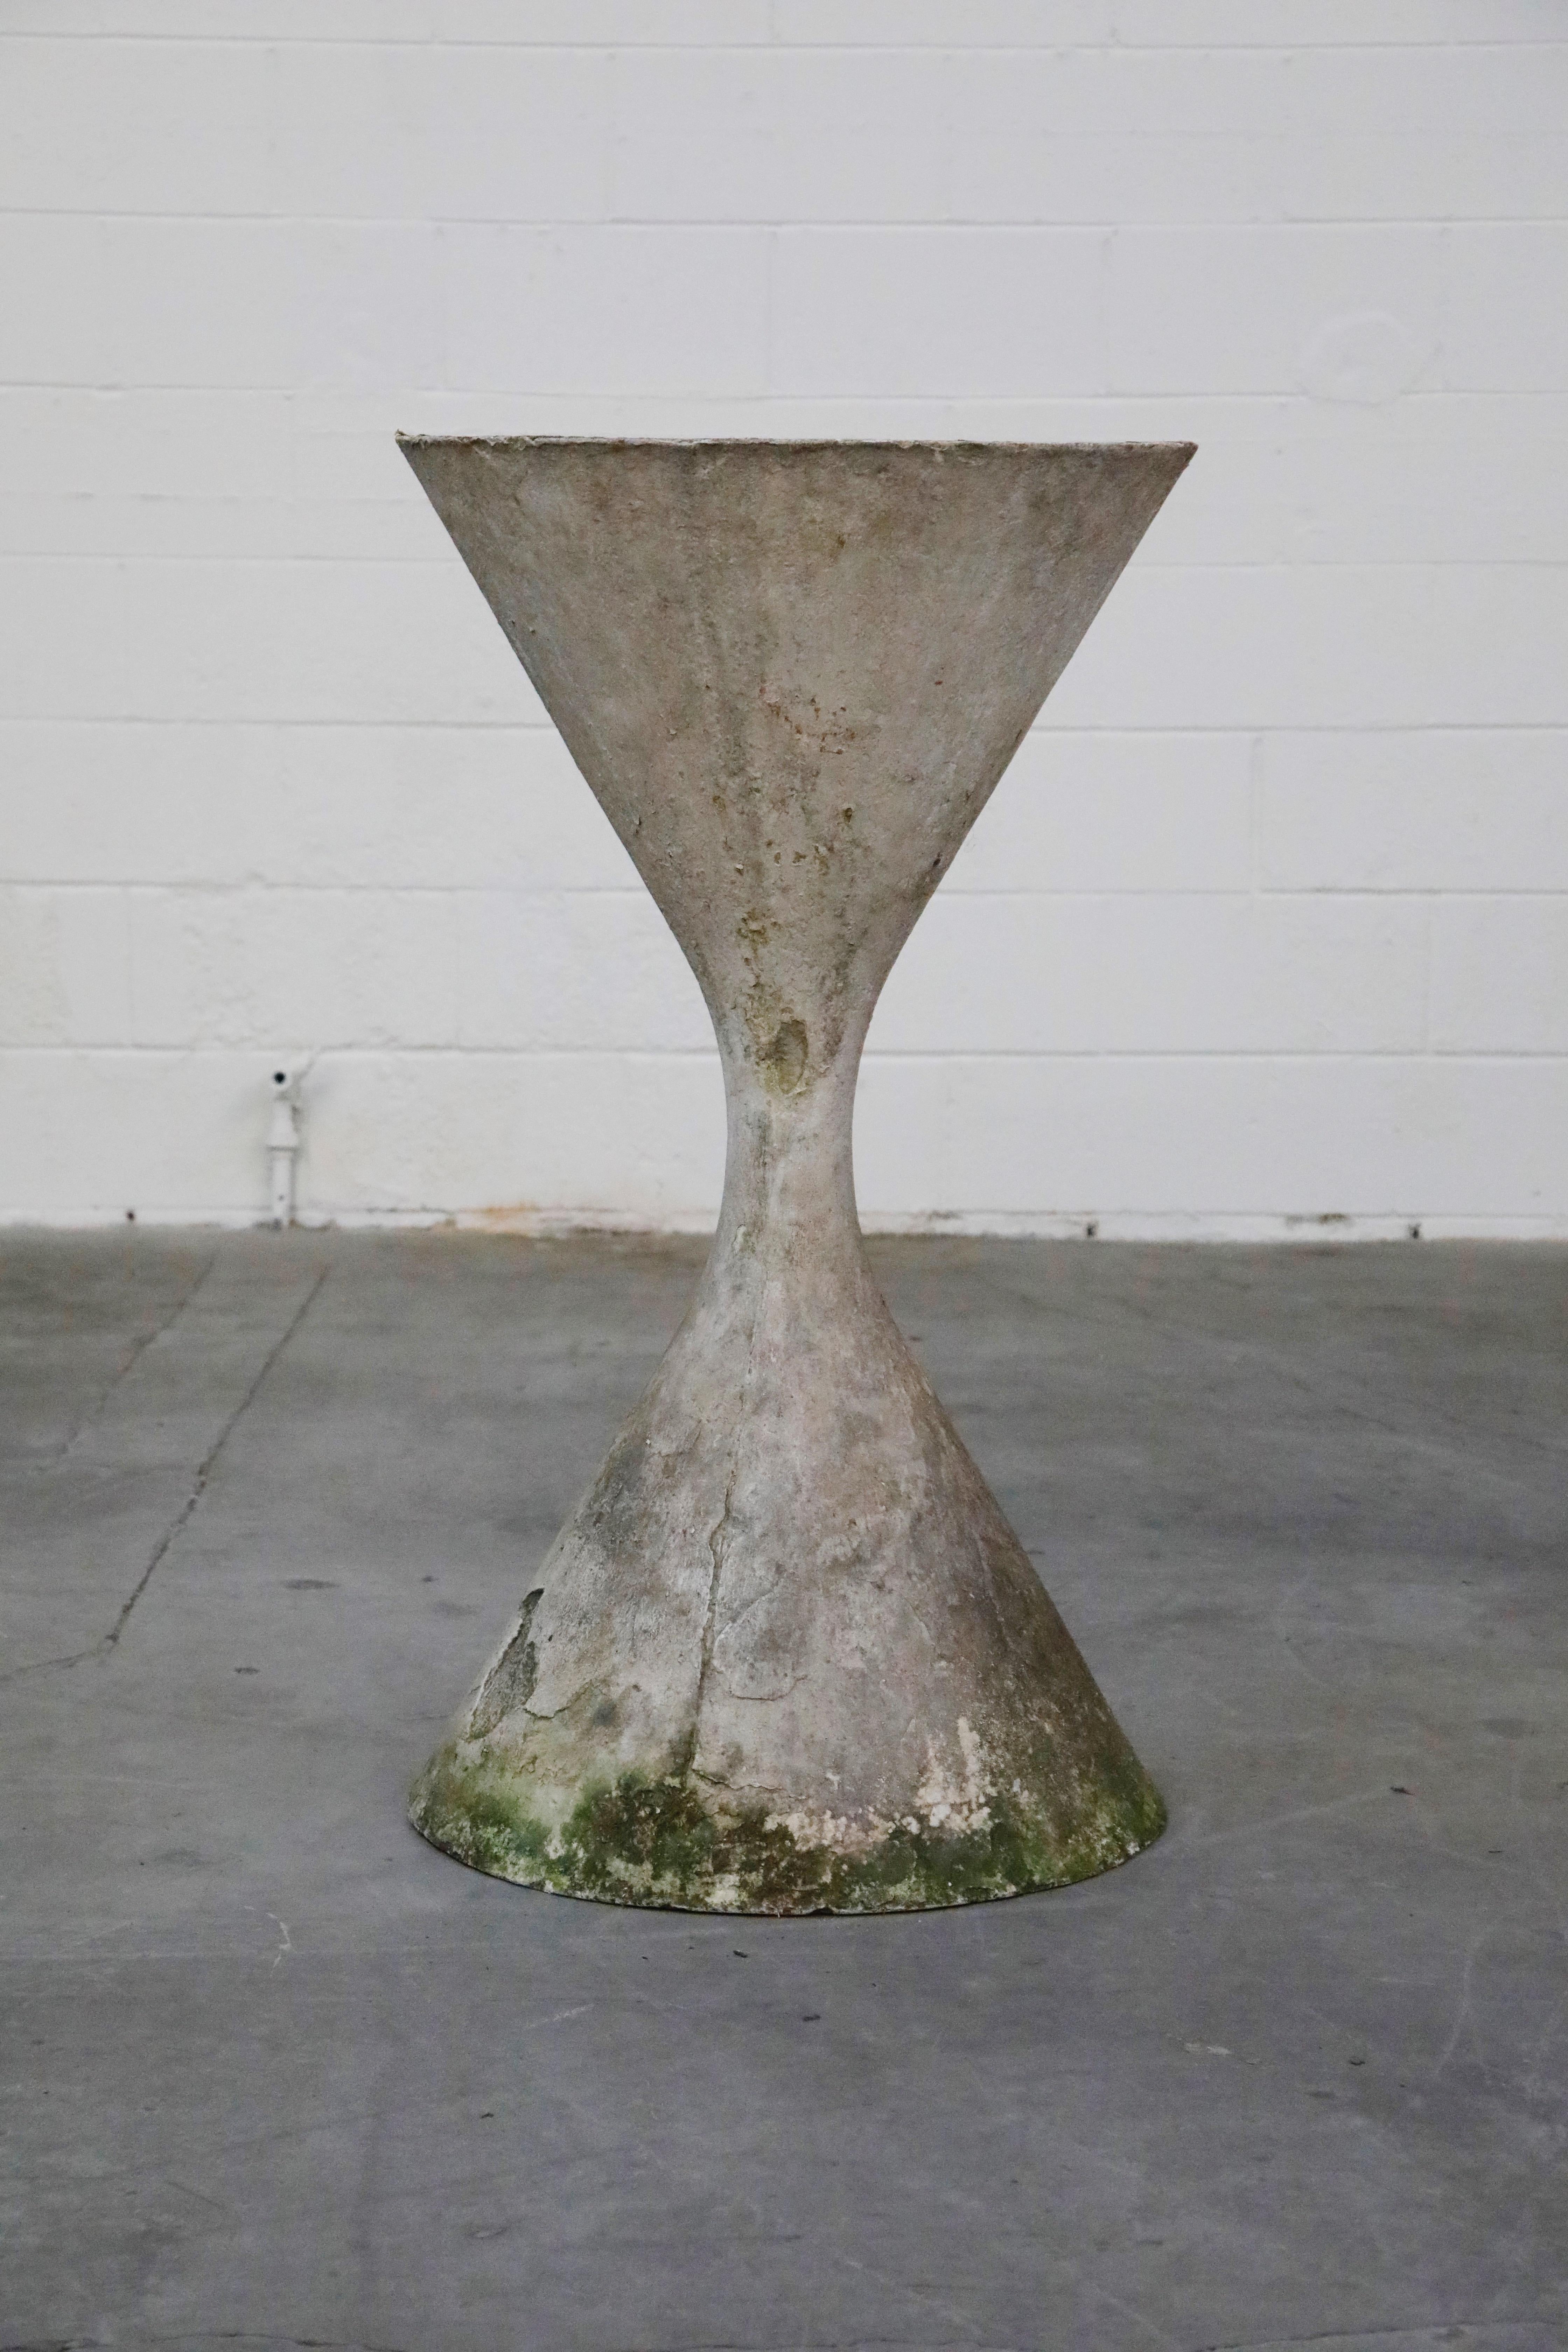 Modern Willy Guhl for Eternit Extra-Large 'Diablo' Hourglass Concrete Planter, c. 1968